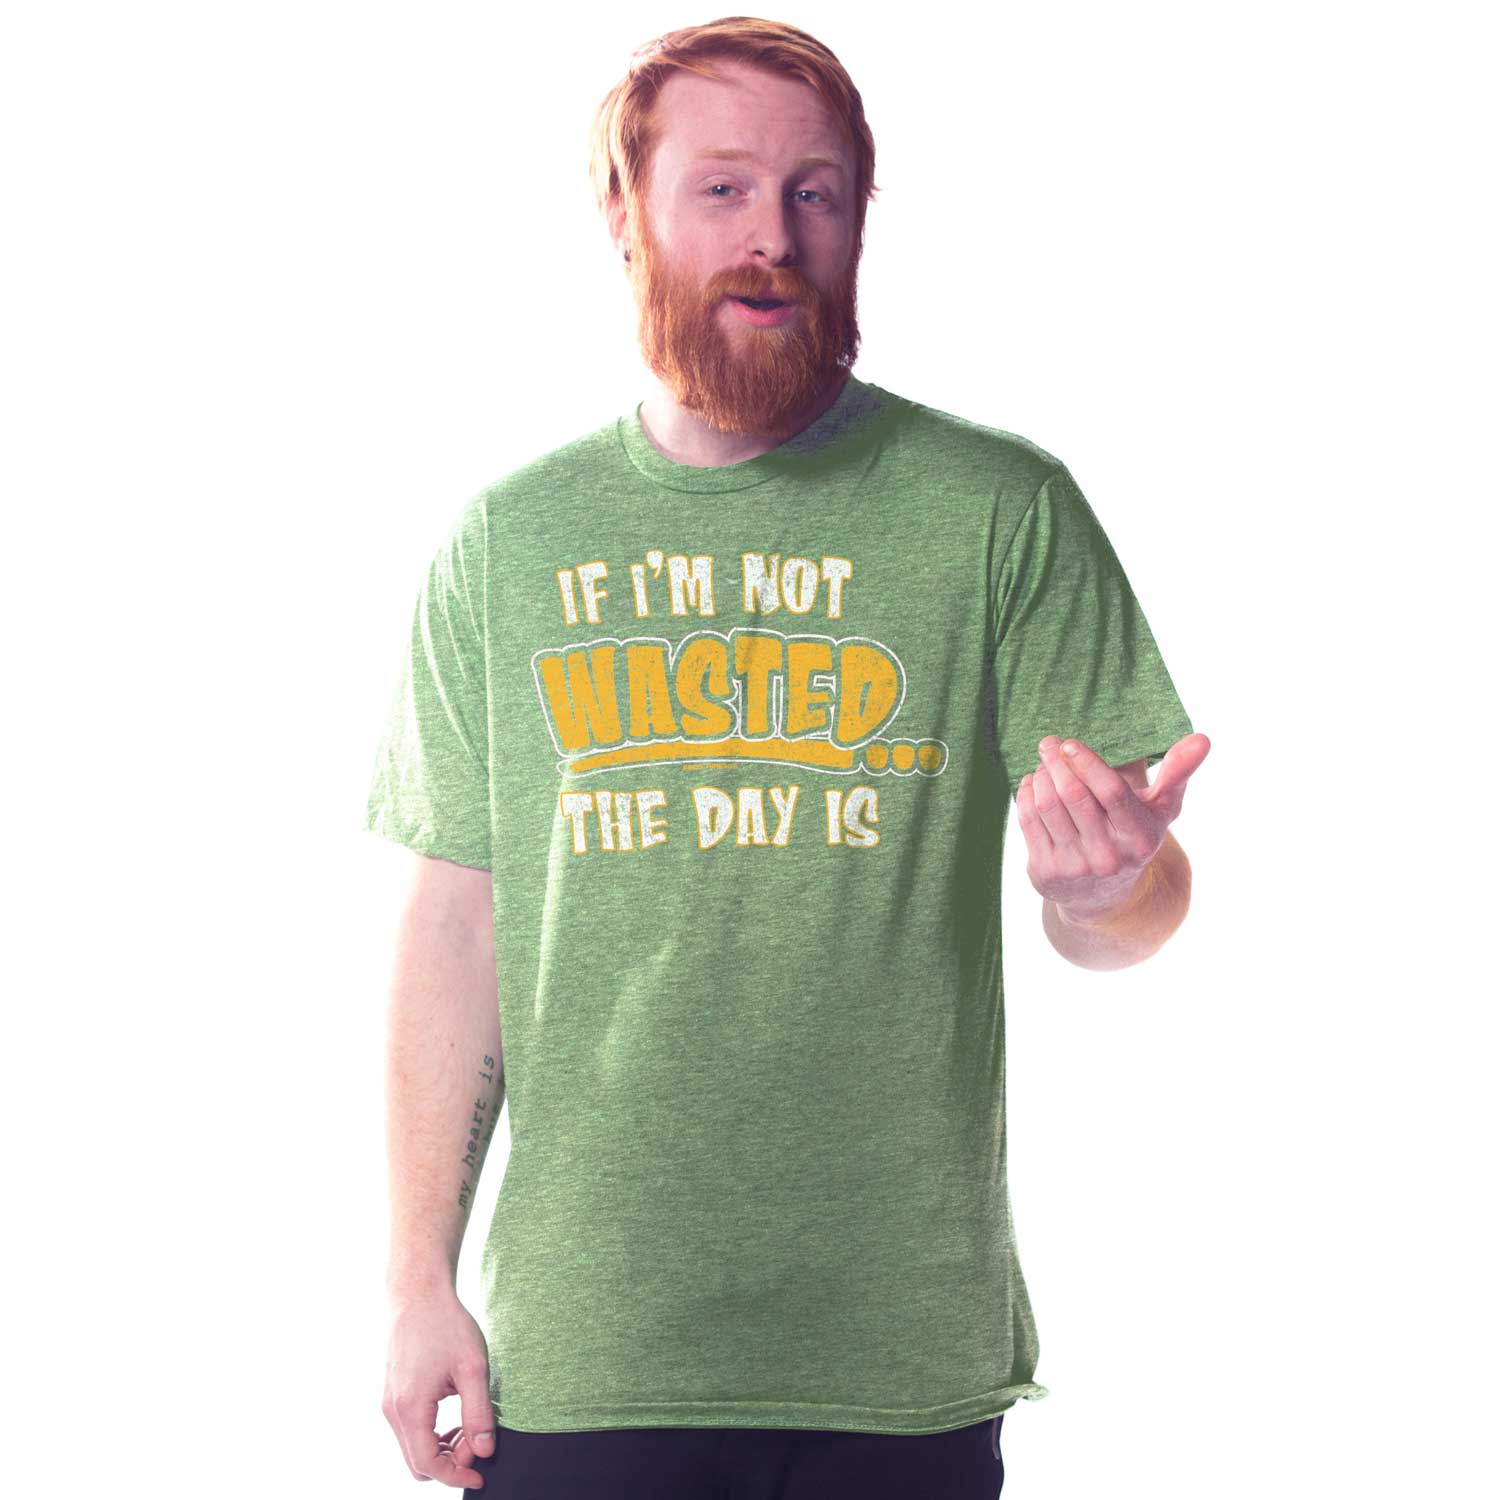 Men's Wasted Day Funny Partying Graphic Tee | Retro St. Paddy's Day T-shirt on Model | Solid Threads